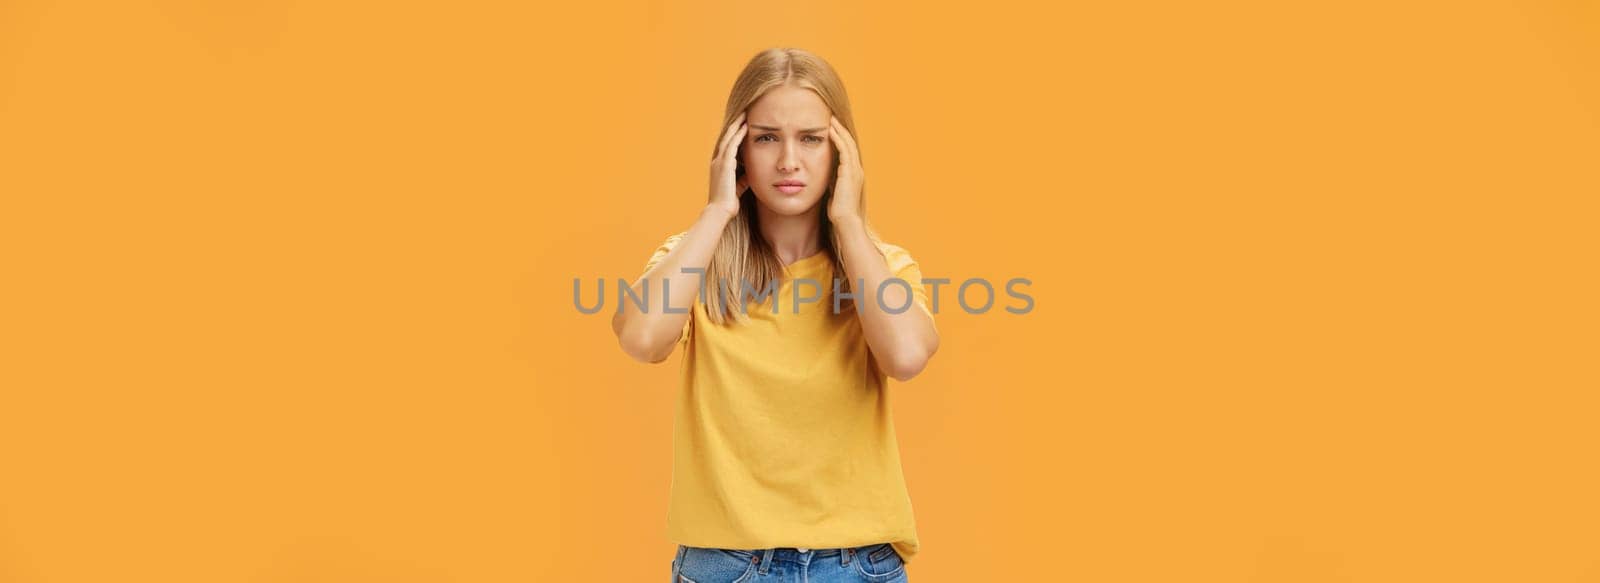 Portrait of drained sad young woman with tanned skin and fair hair feeling discomfort in head touching temples squinting and looking sick suffering headache or migraine trying concentrate on work. Copy space